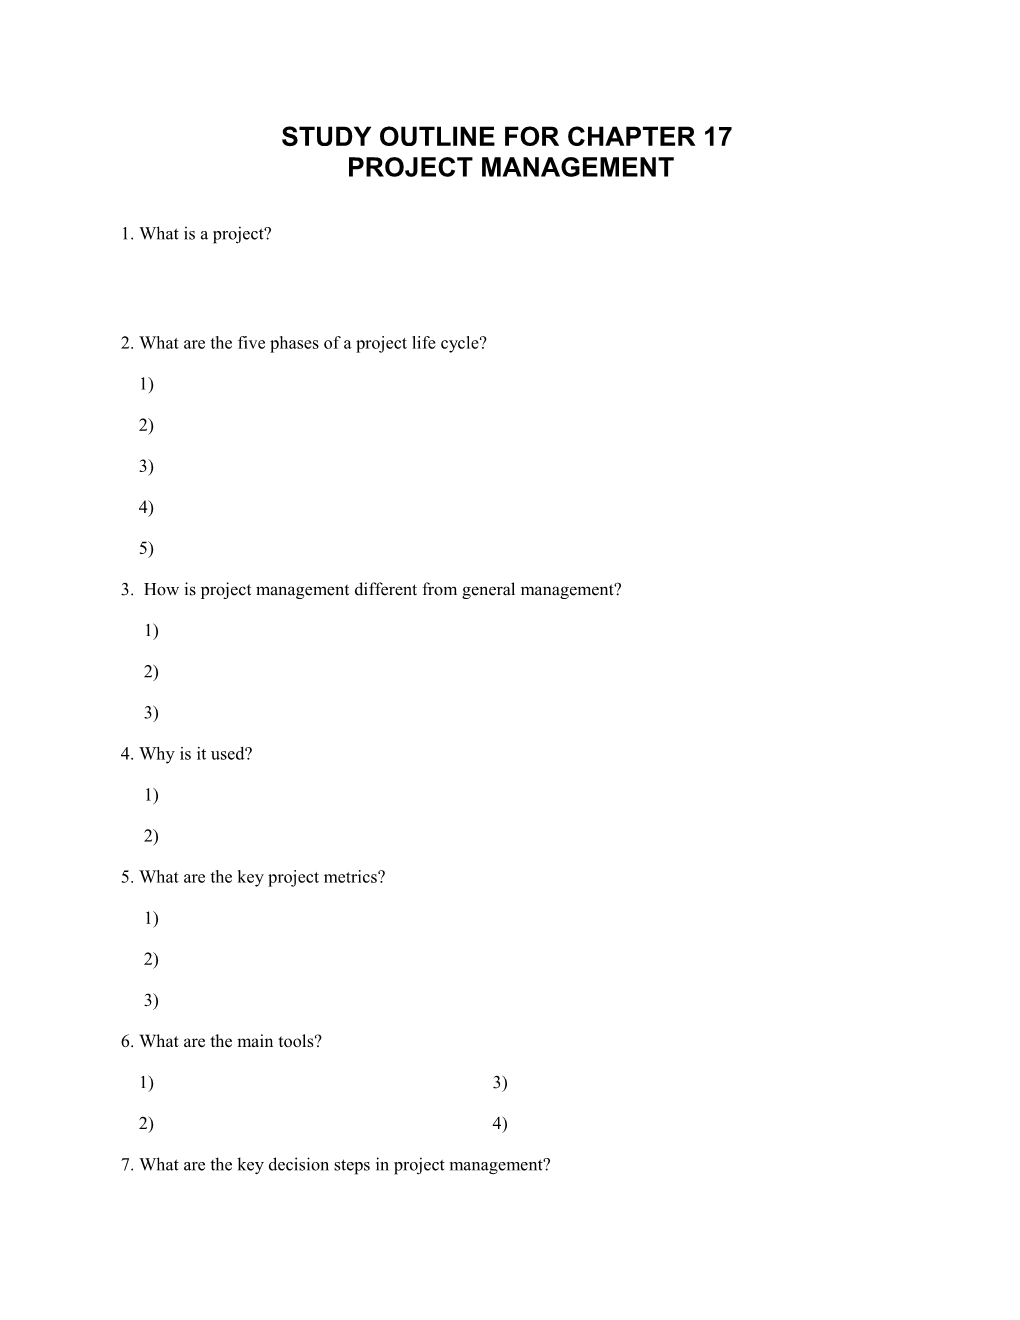 Study Outline for Chapter 17 Project Management